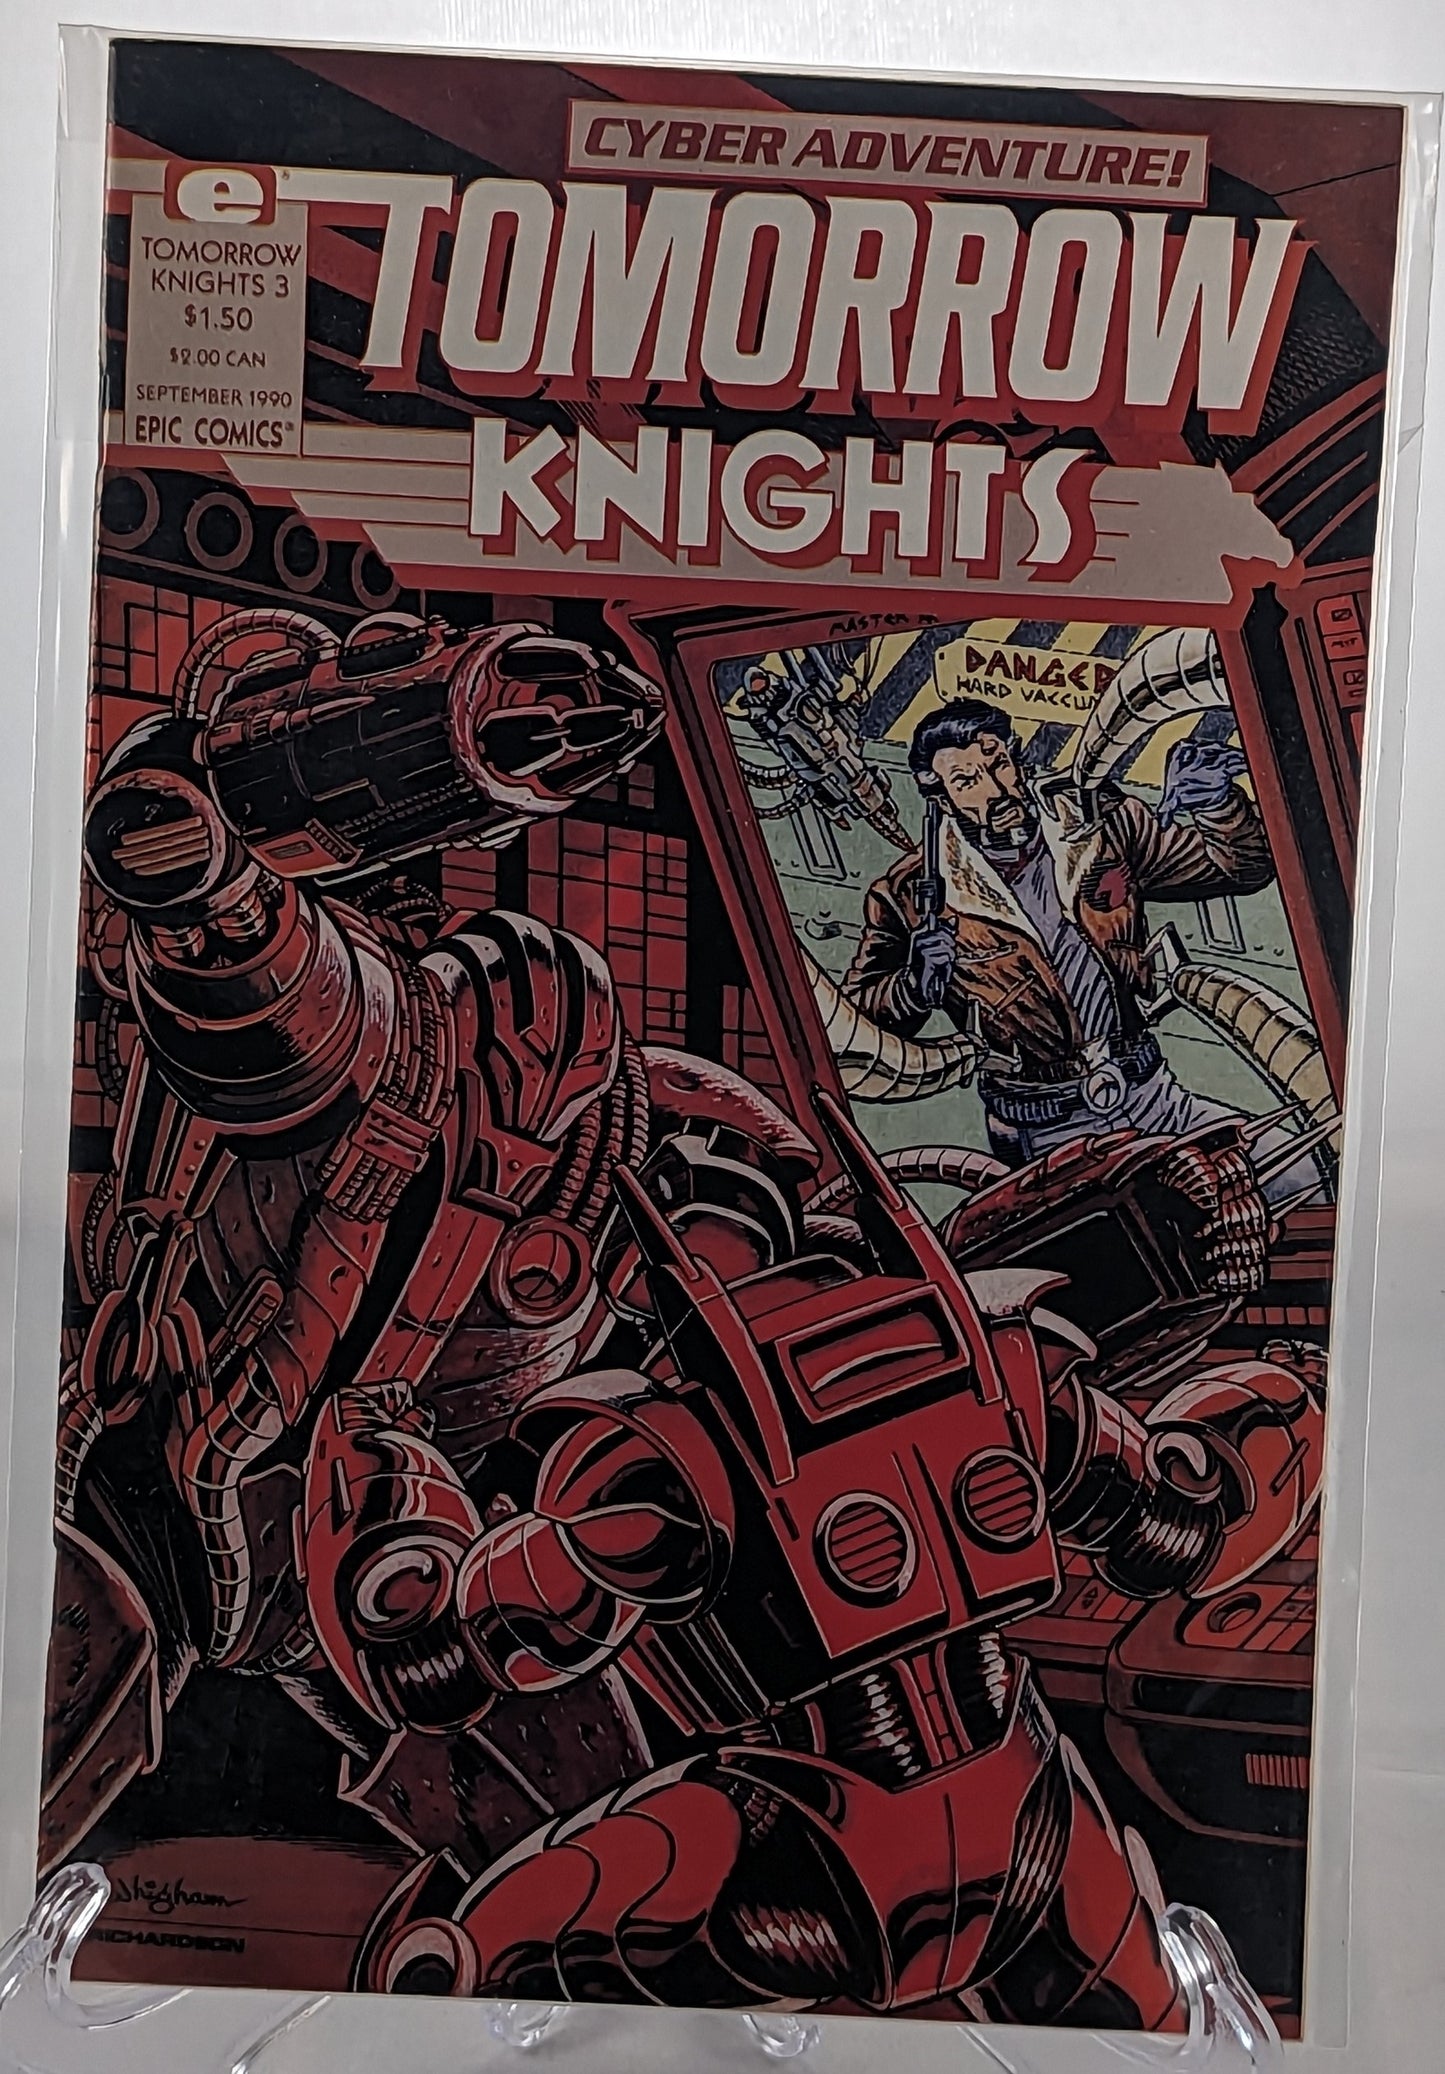 Tomorrow Knights Cyber Adventure Issue 3